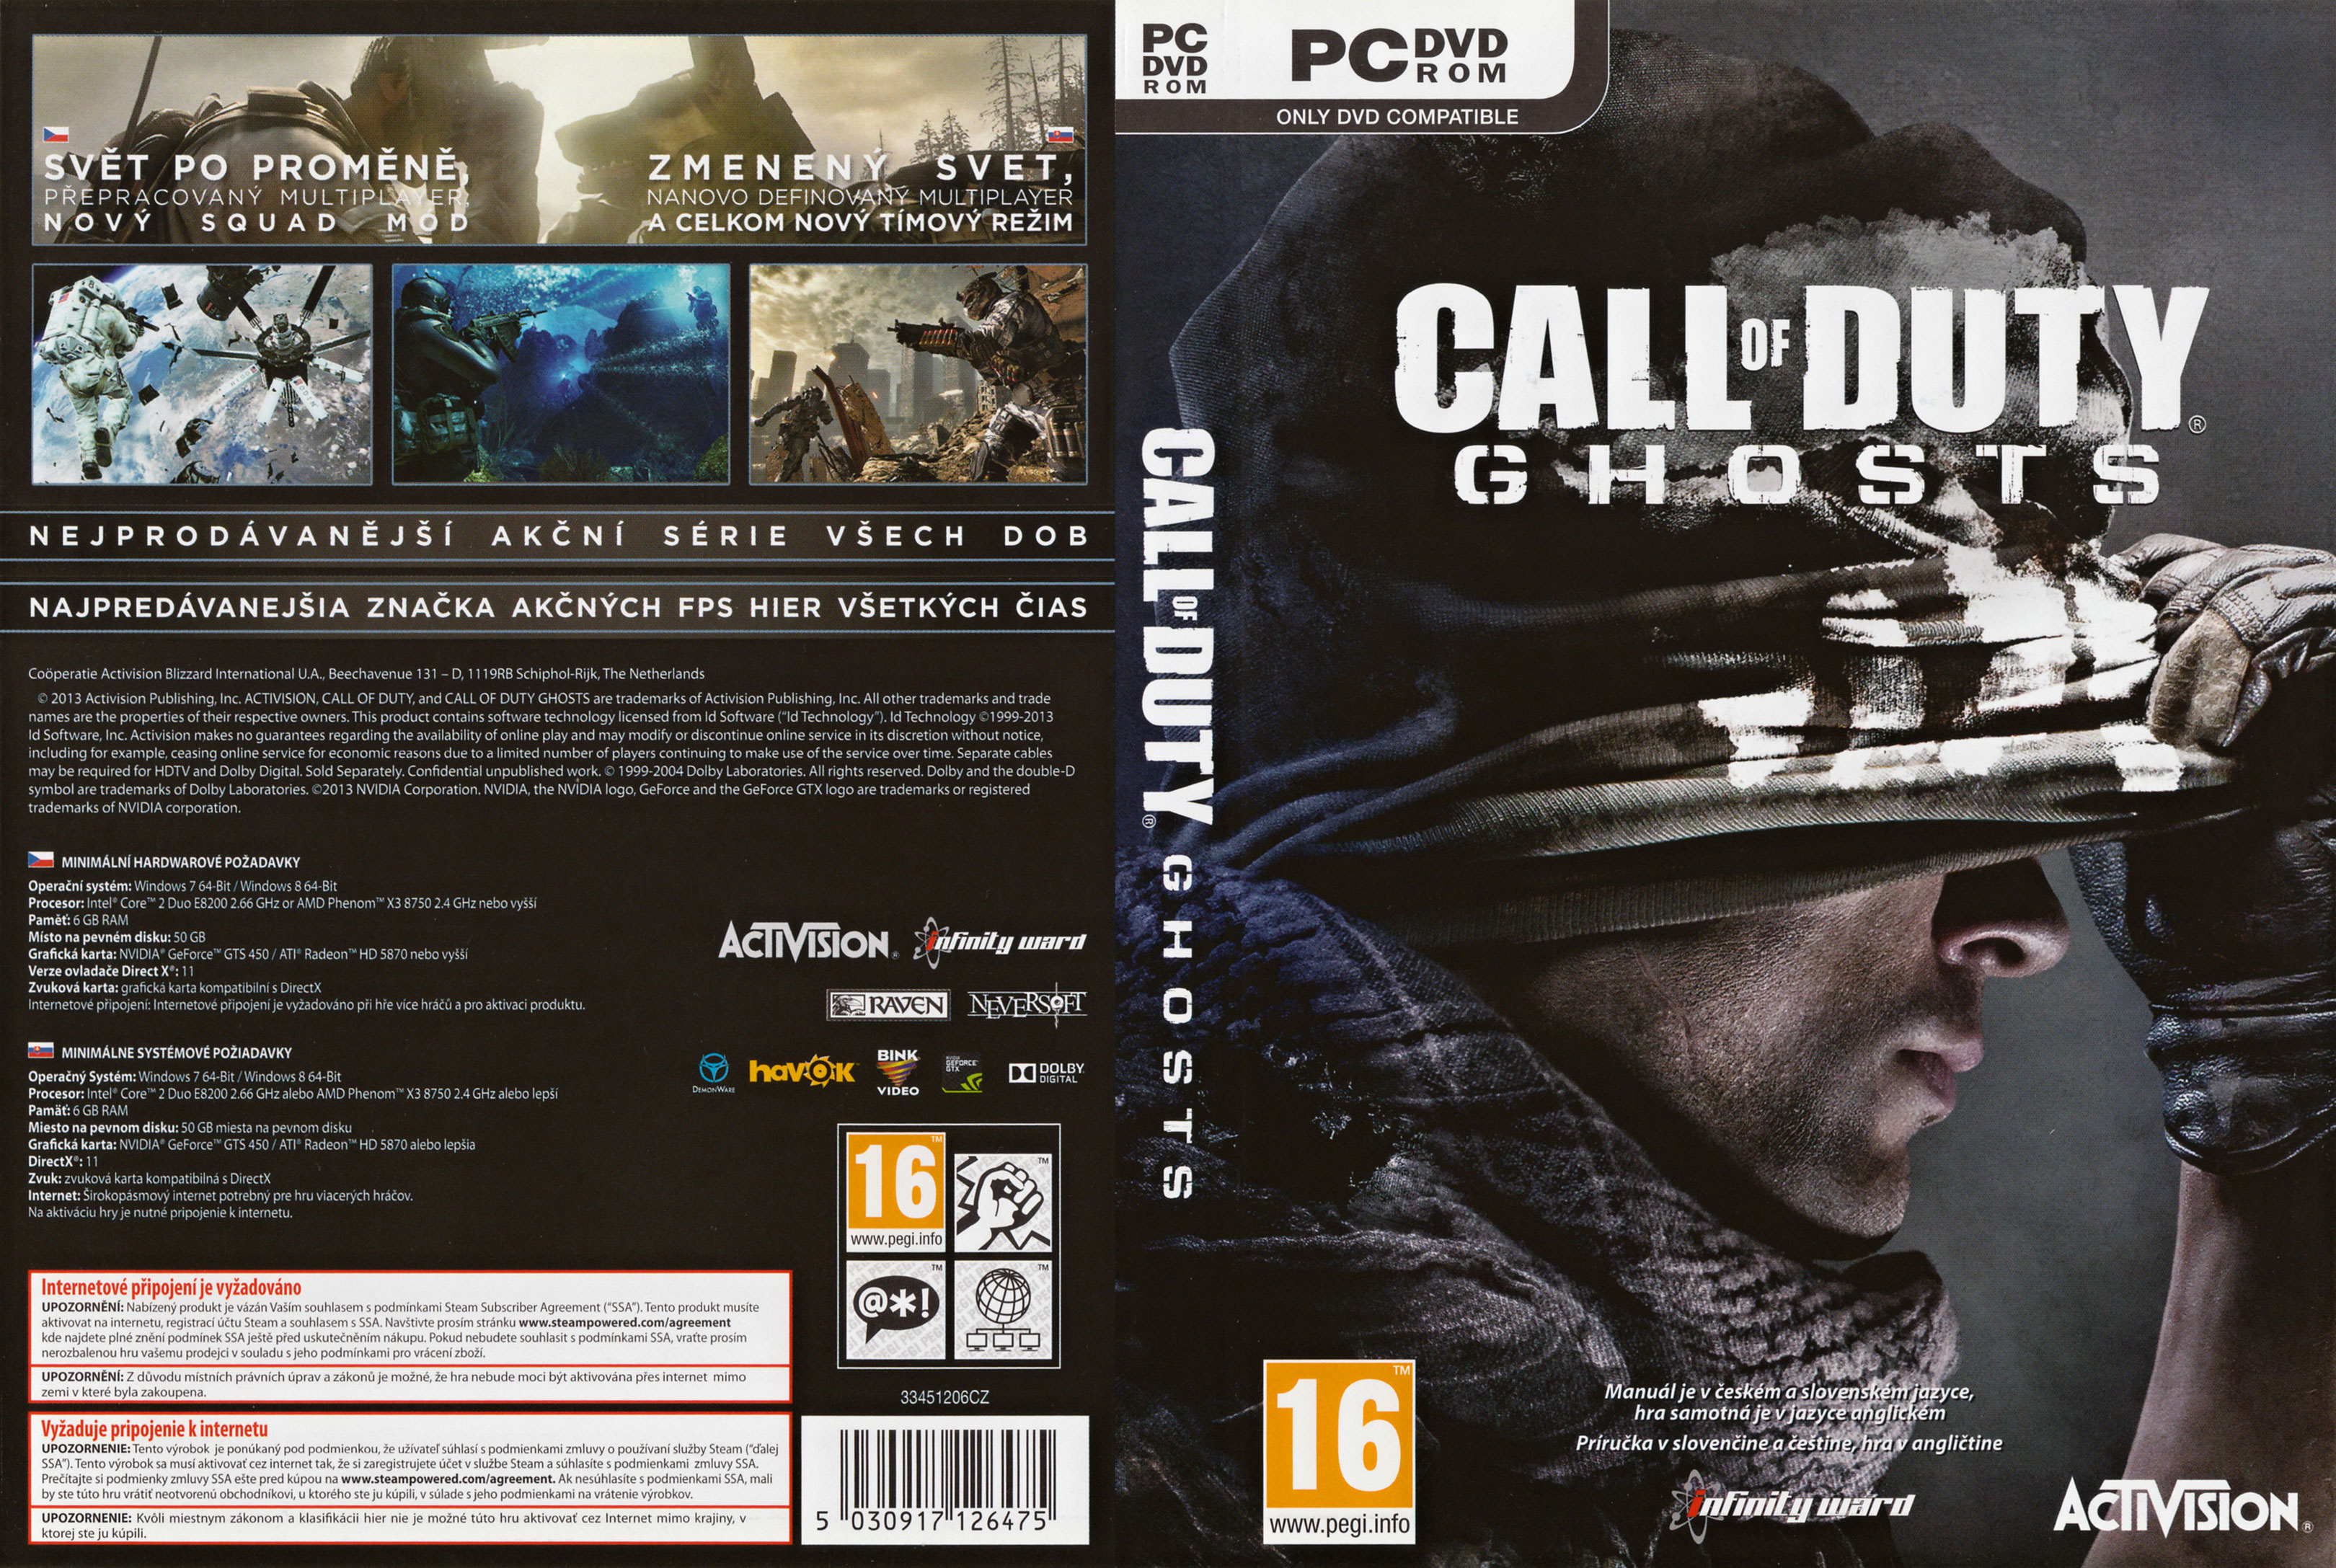 Call of Duty: Ghosts - DVD obal